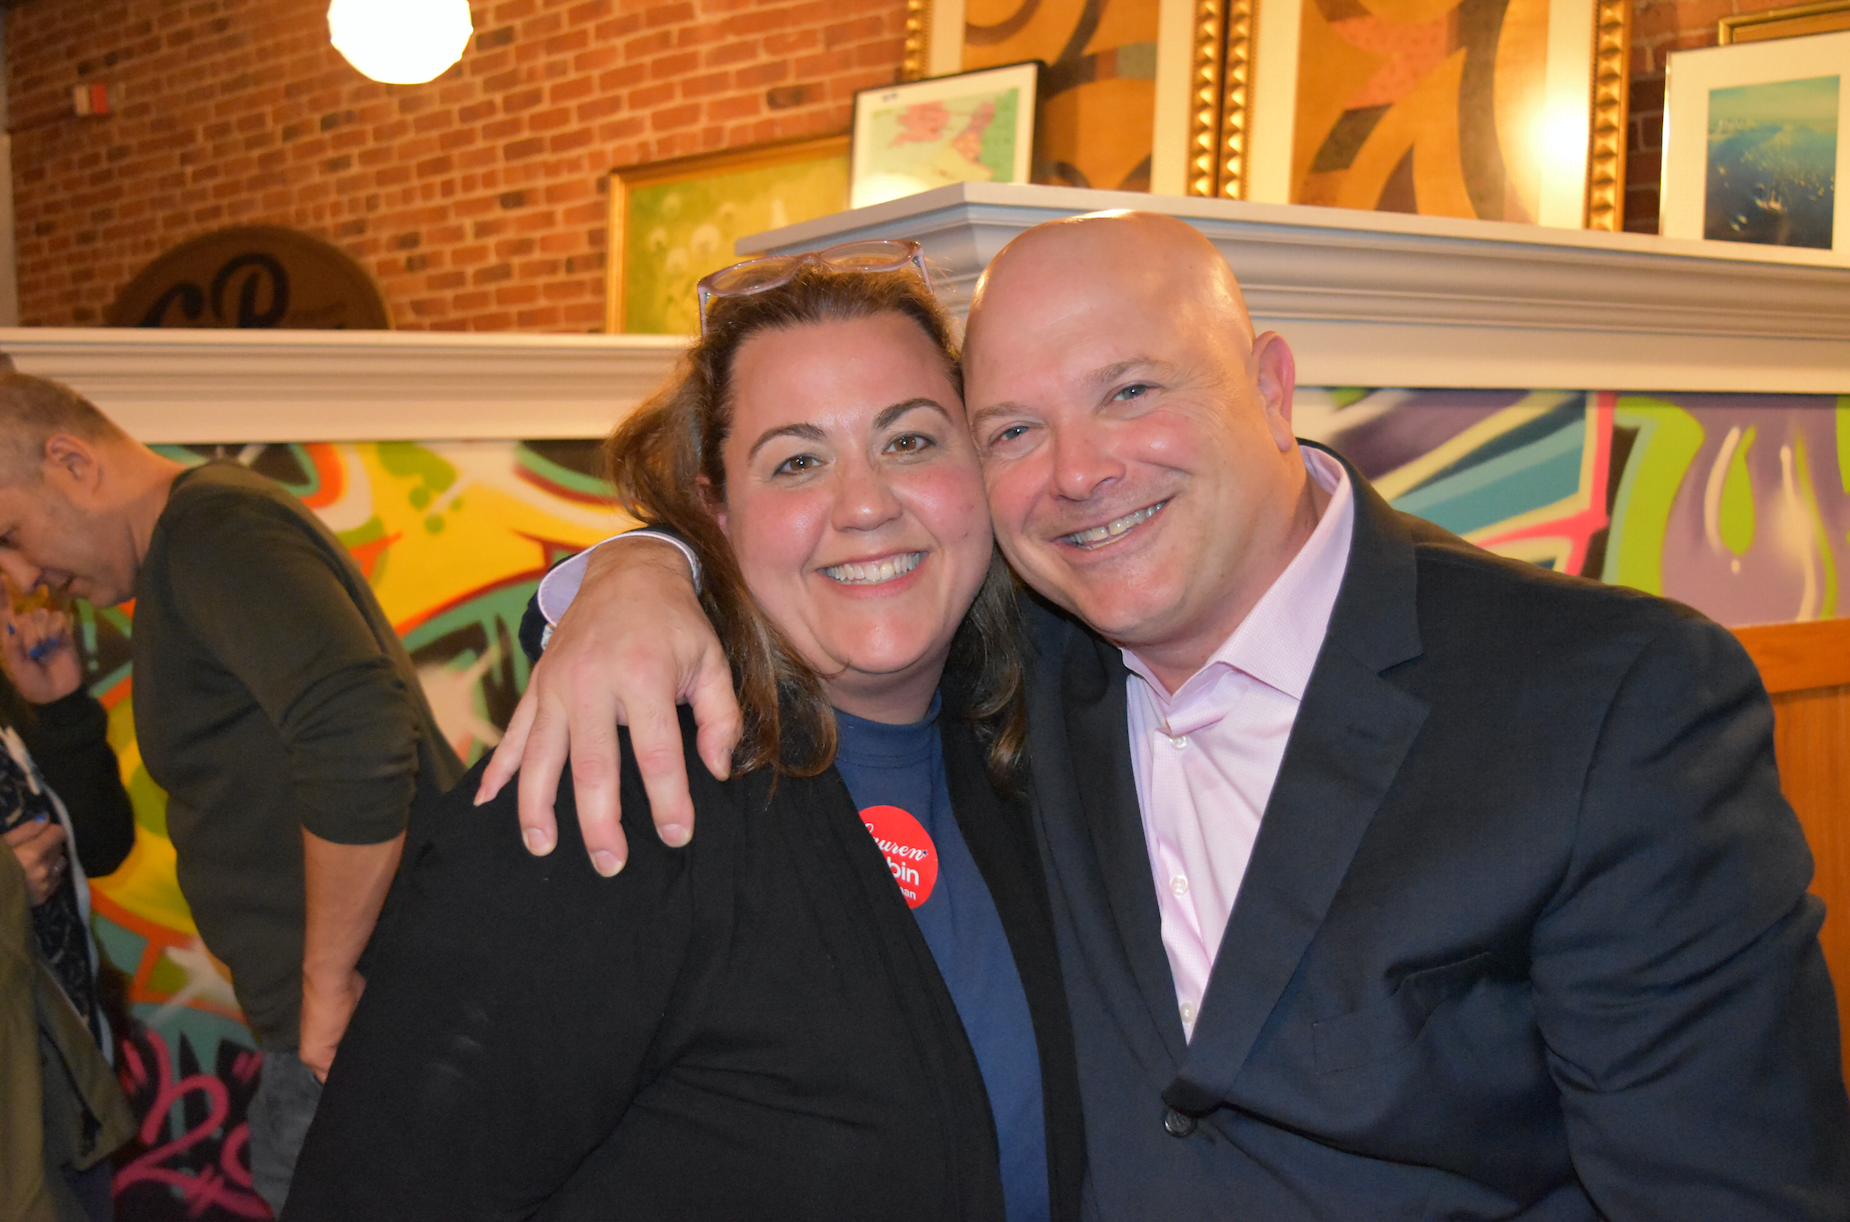 Jackie Budkins and Mike Bocchino celebrated Republican victories at the Teen Center. Nov 5, 2019 Photo: Heather Brown